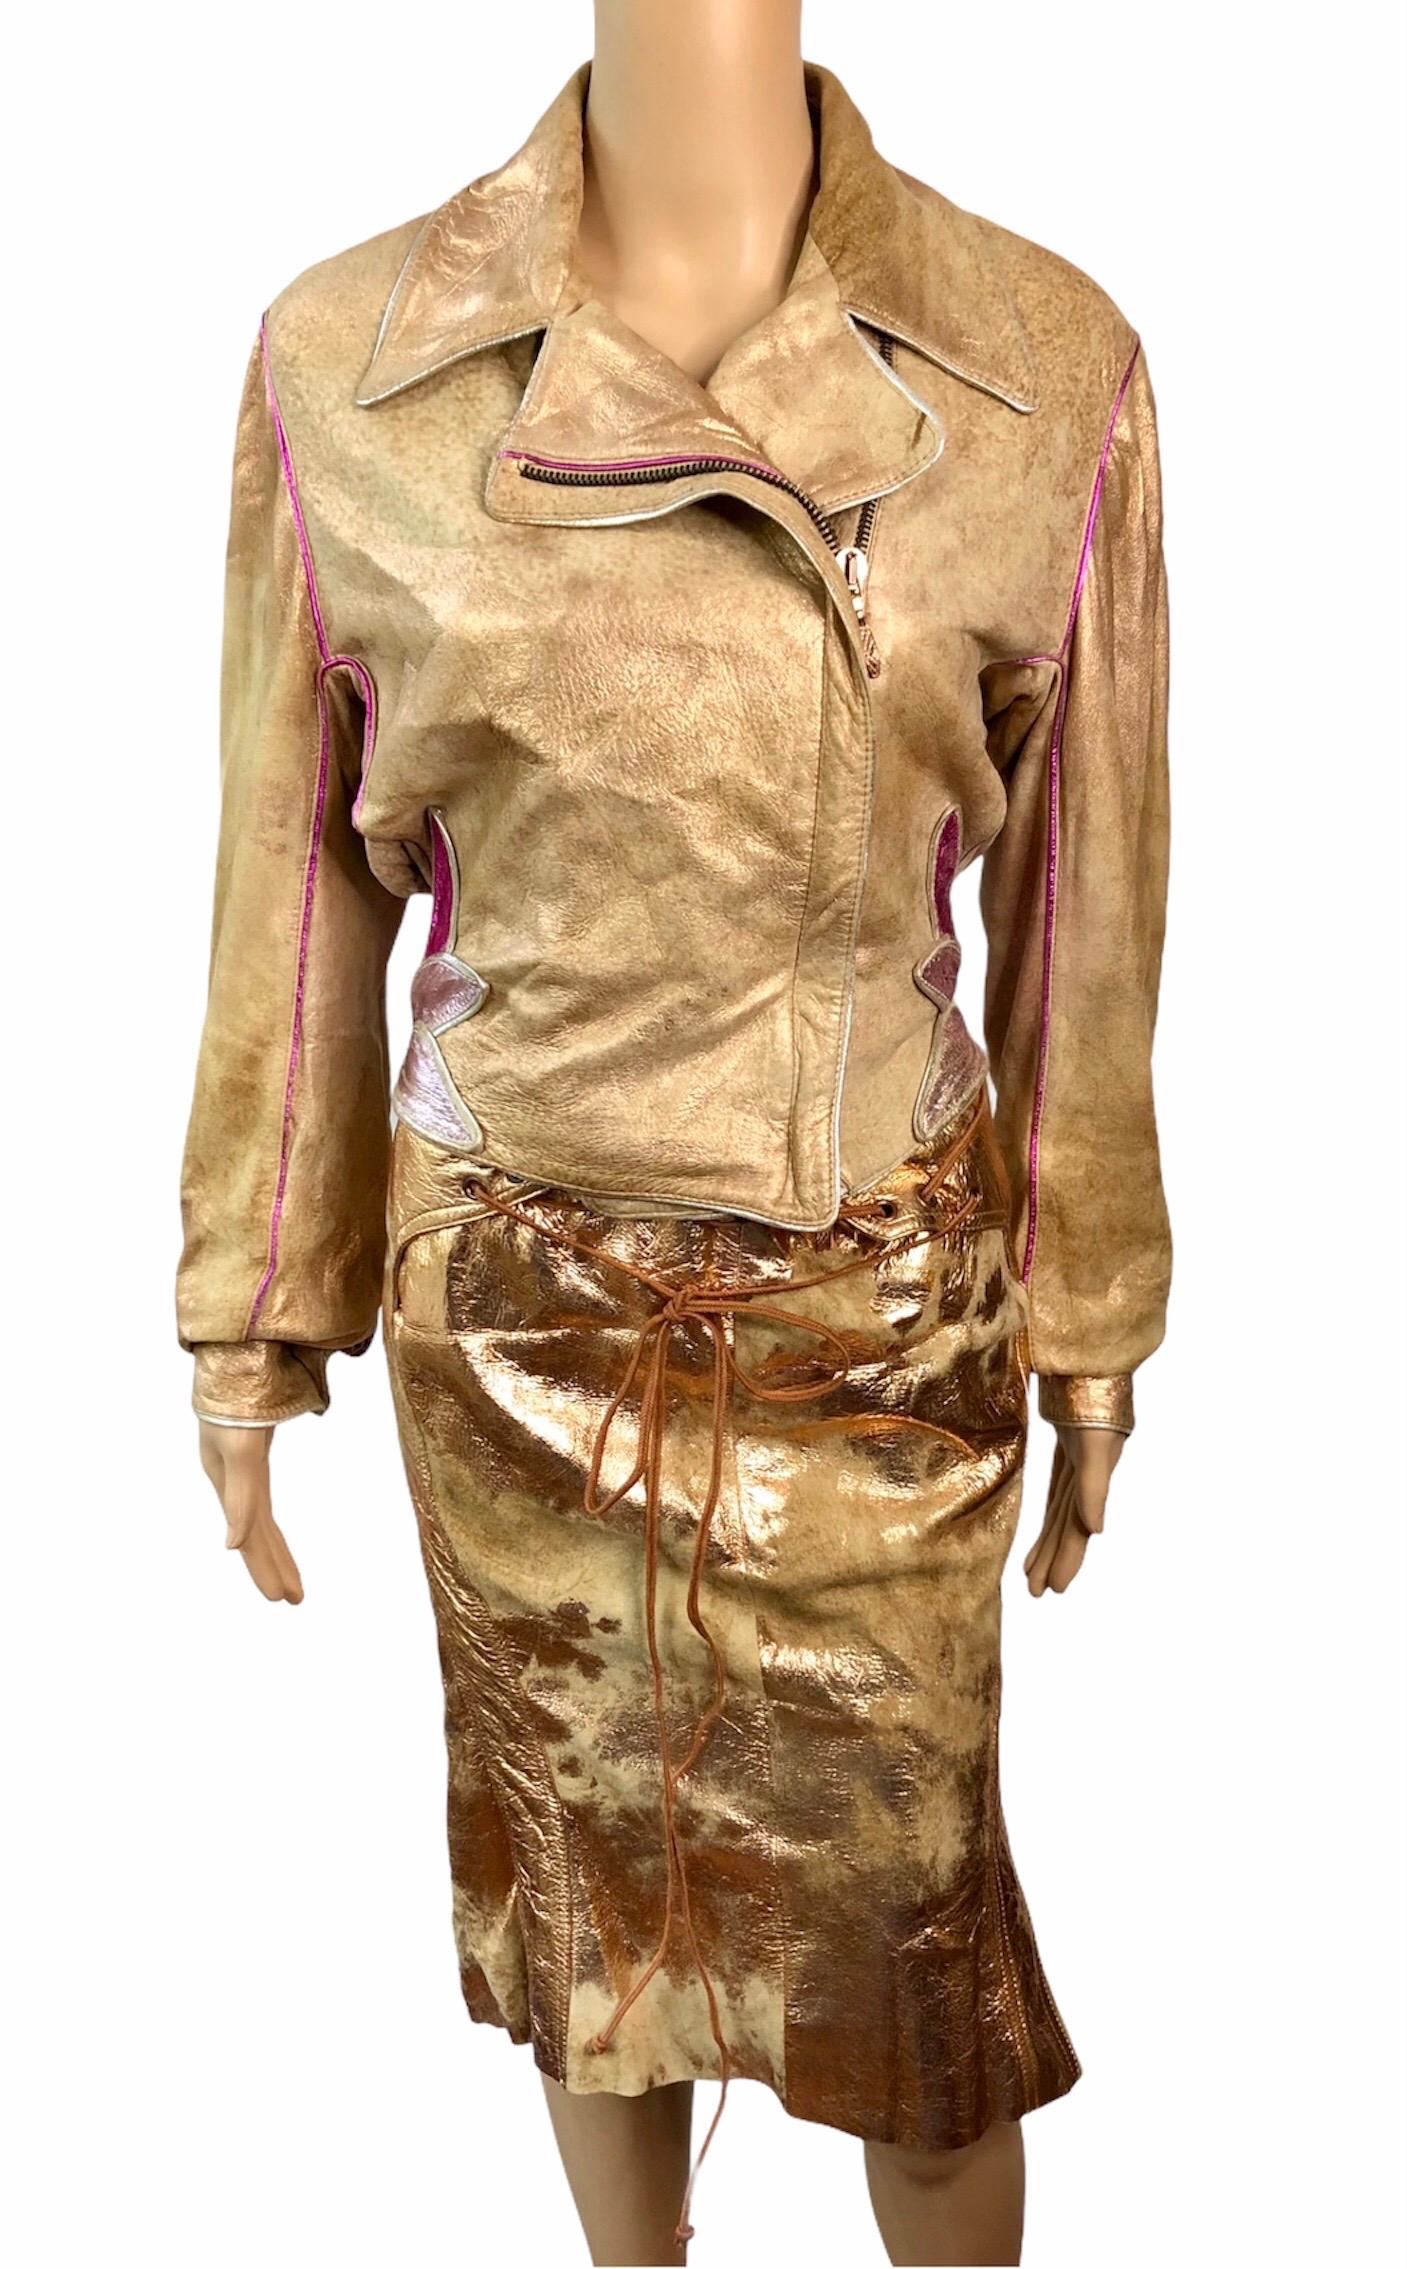 Roberto Cavalli S/S 2002 Runway Metallic Leather Jacket Coat & Skirt 2 Piece Set Size M

Look 31 from the Spring 2002 Collection.

